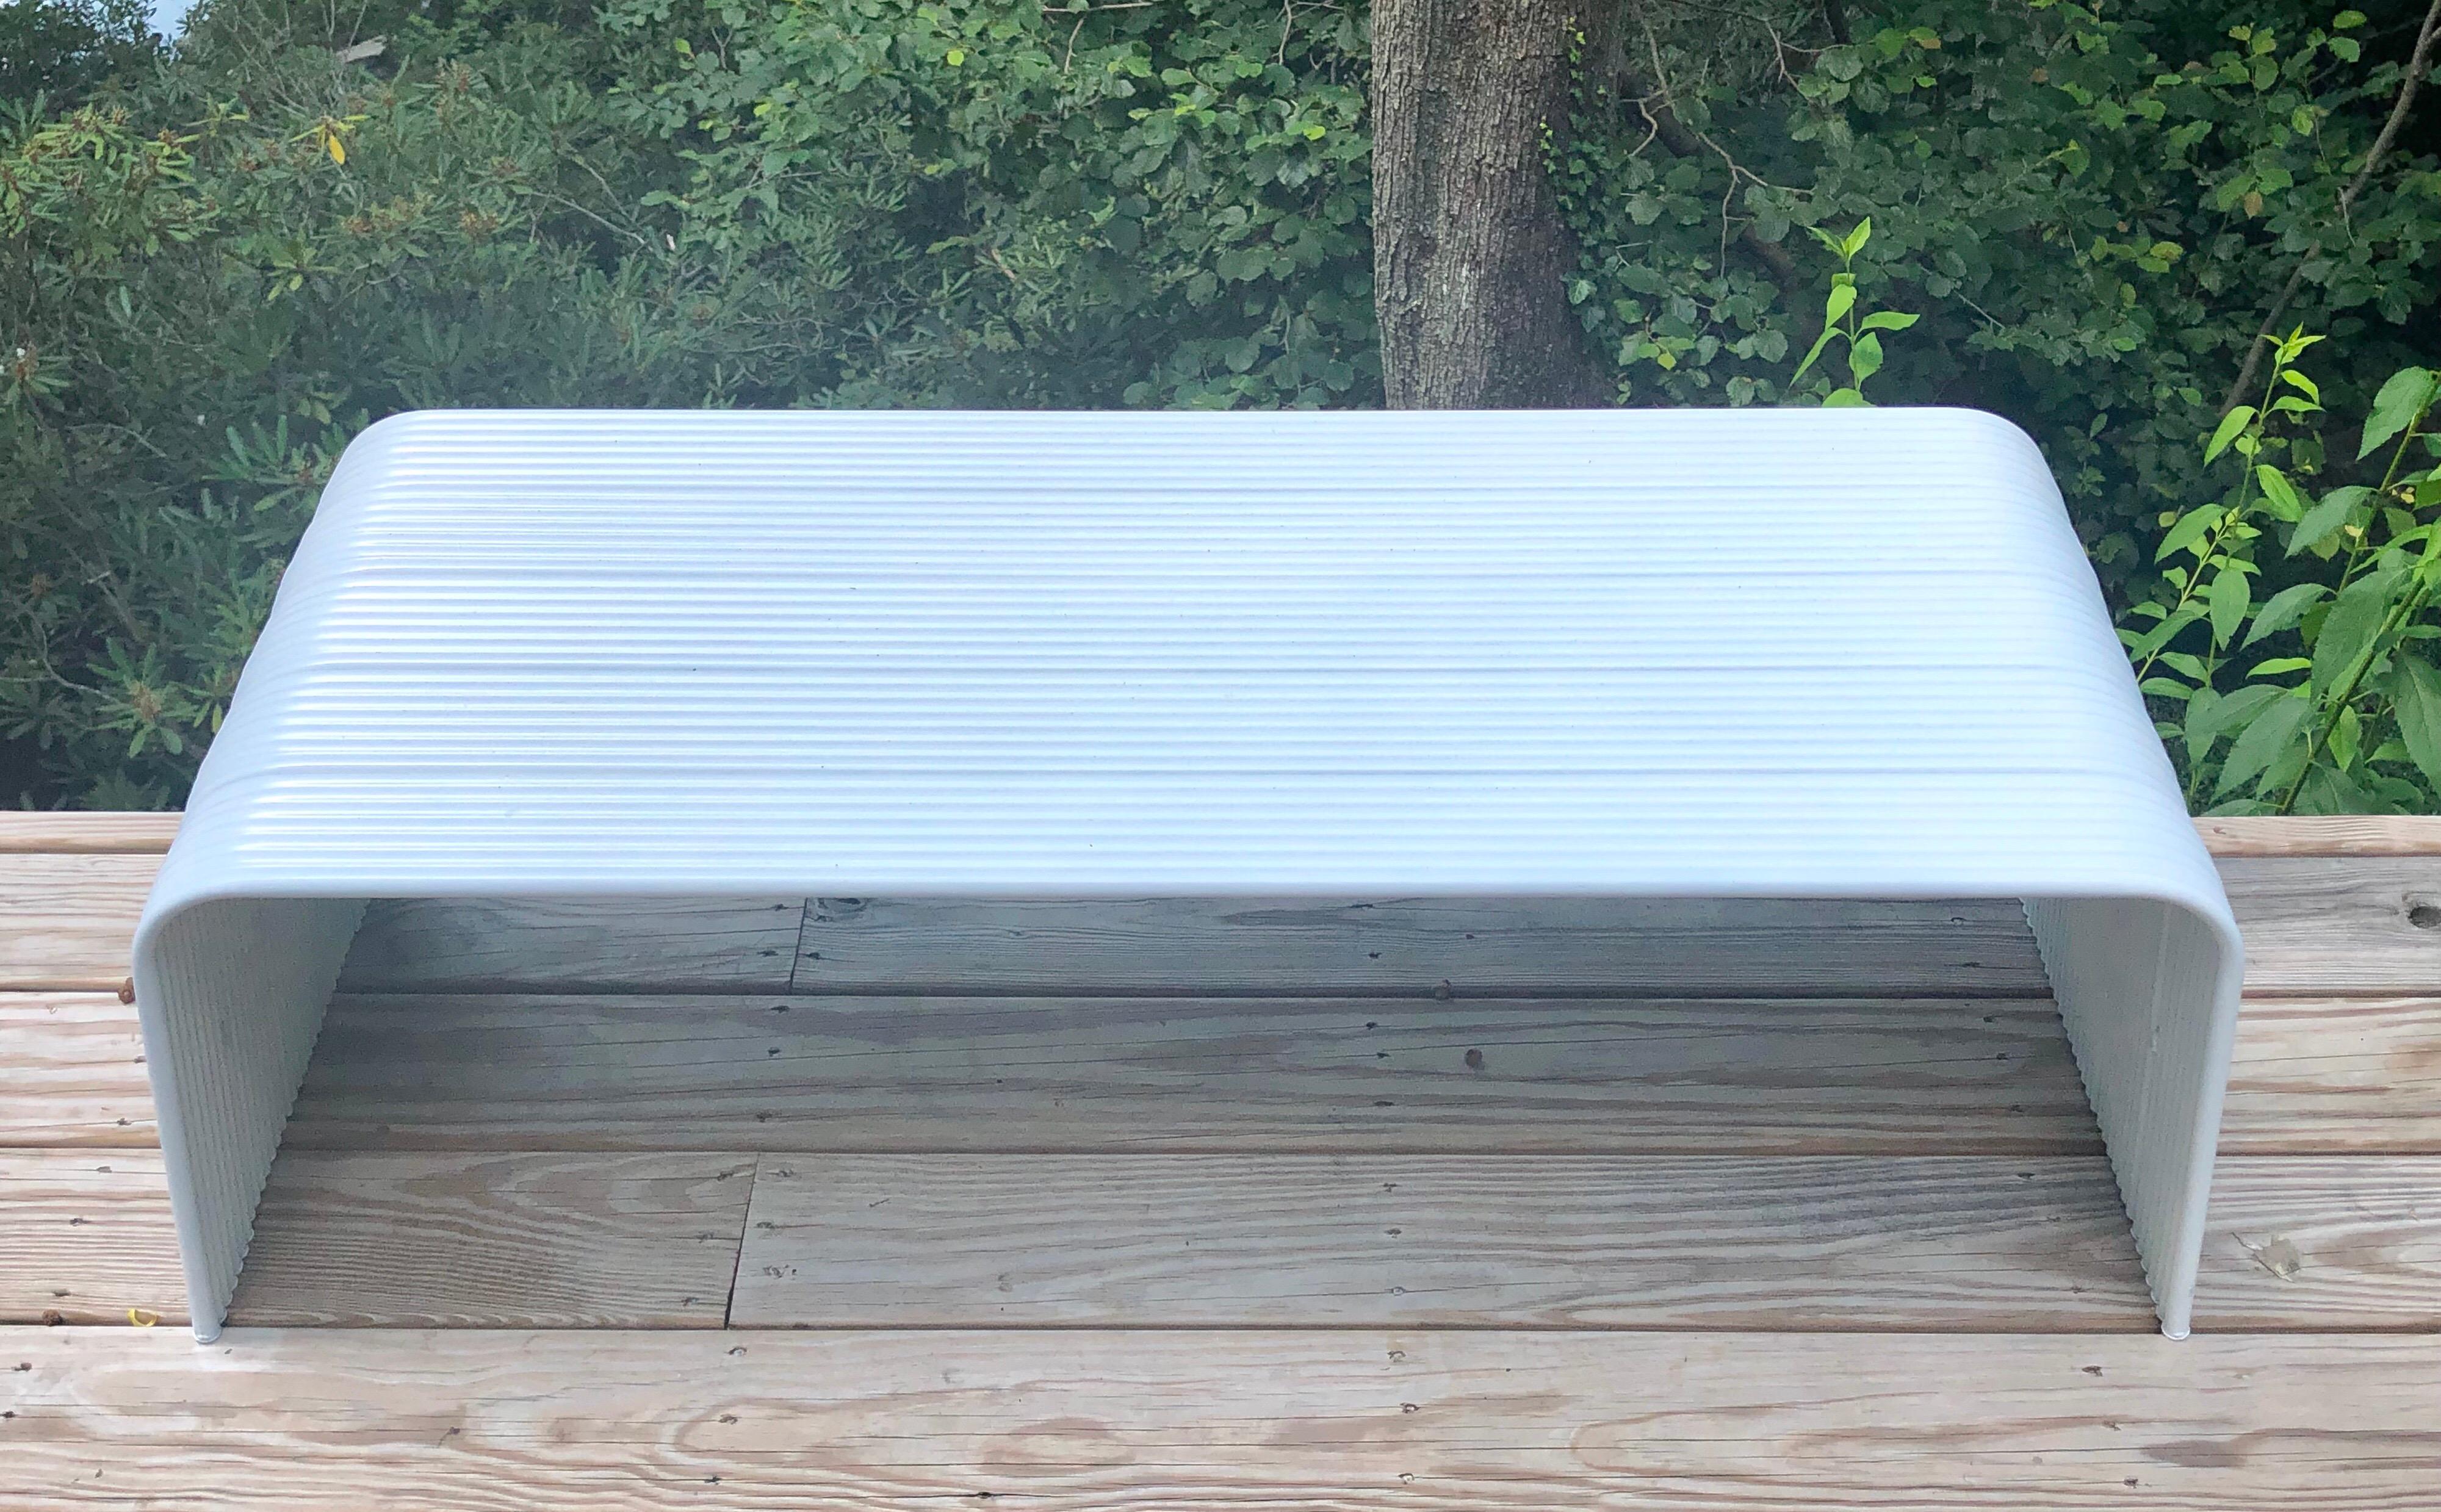 Italian Mid-Century Modern white enameled aluminum bench attributed to Superstudio.

The bench is in reverse U-shaped form and composed of a series of grooved pieces of aluminum. It is light and designed to be easily transported as they will